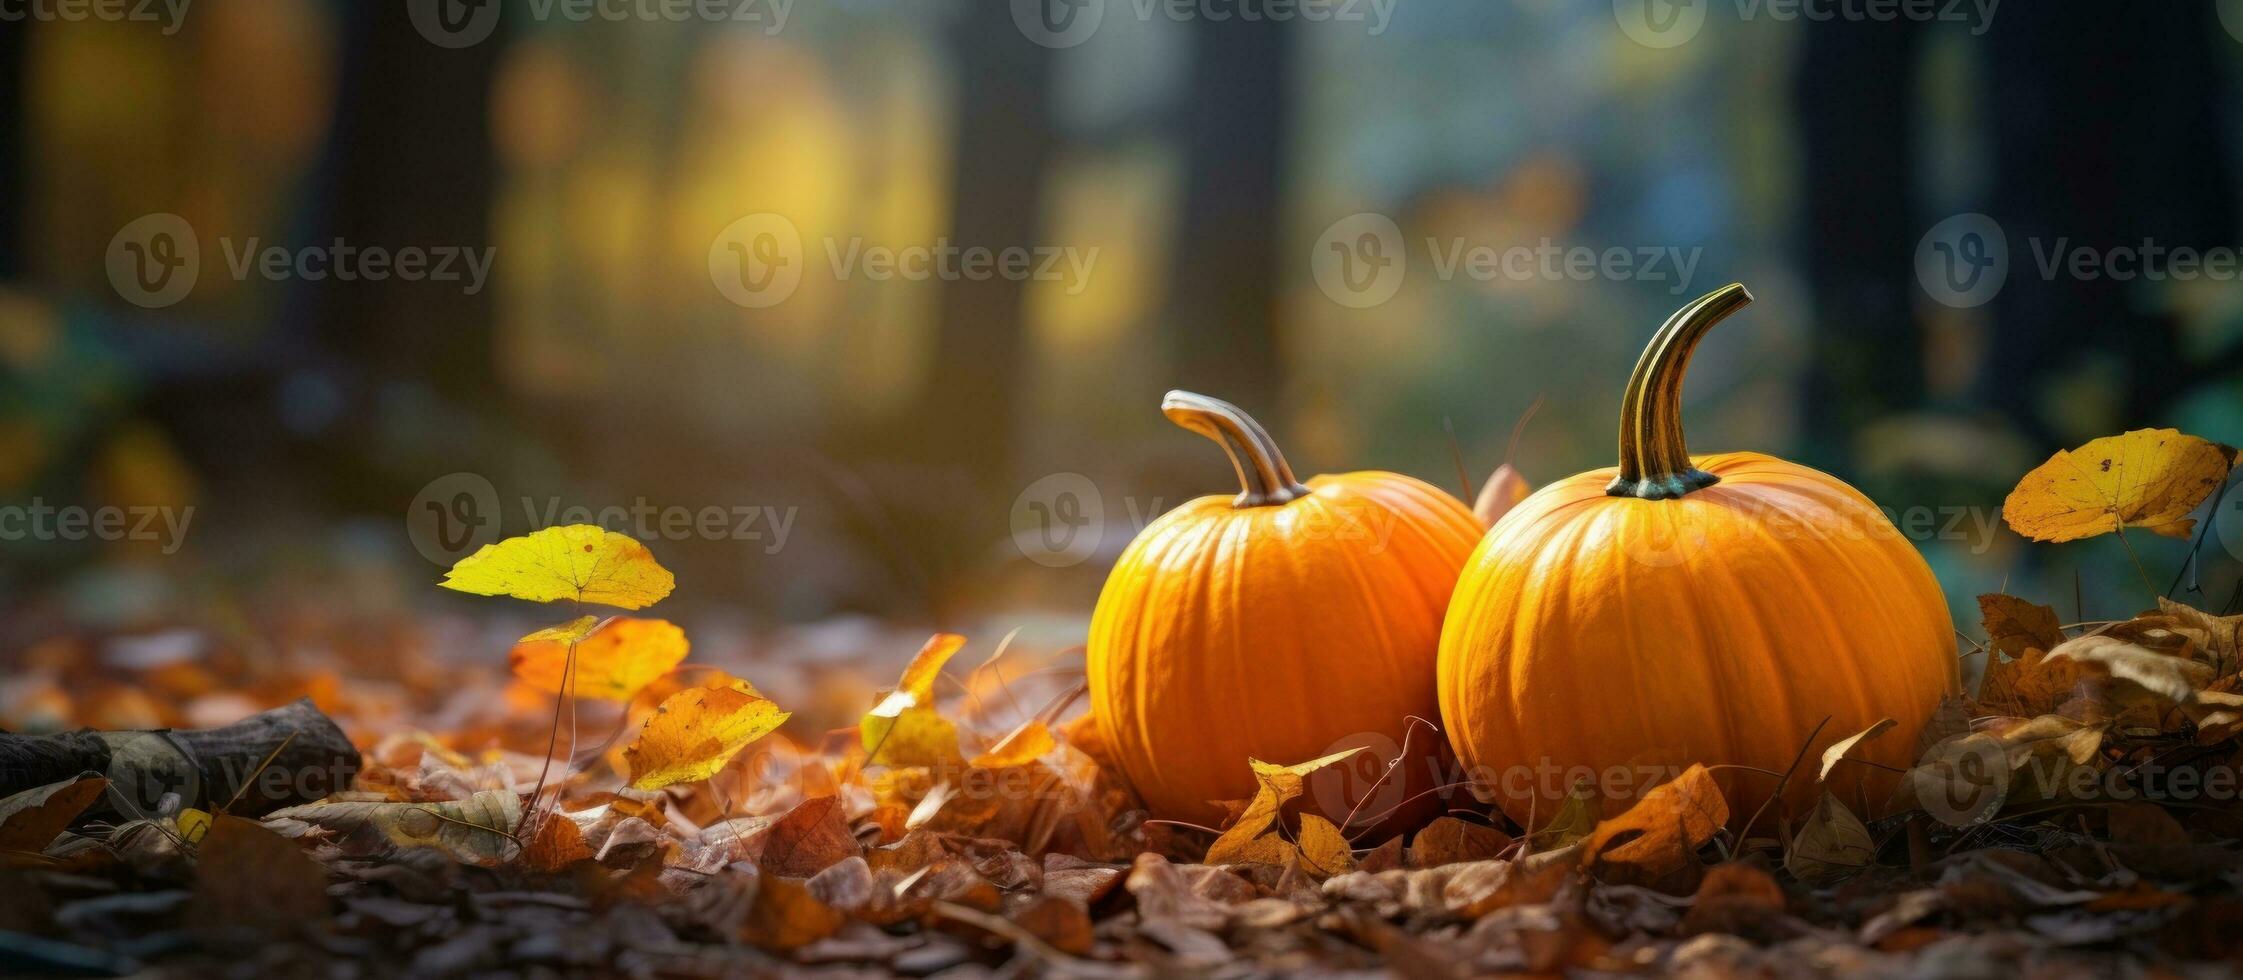 Autumn natural background with pumpkins photo